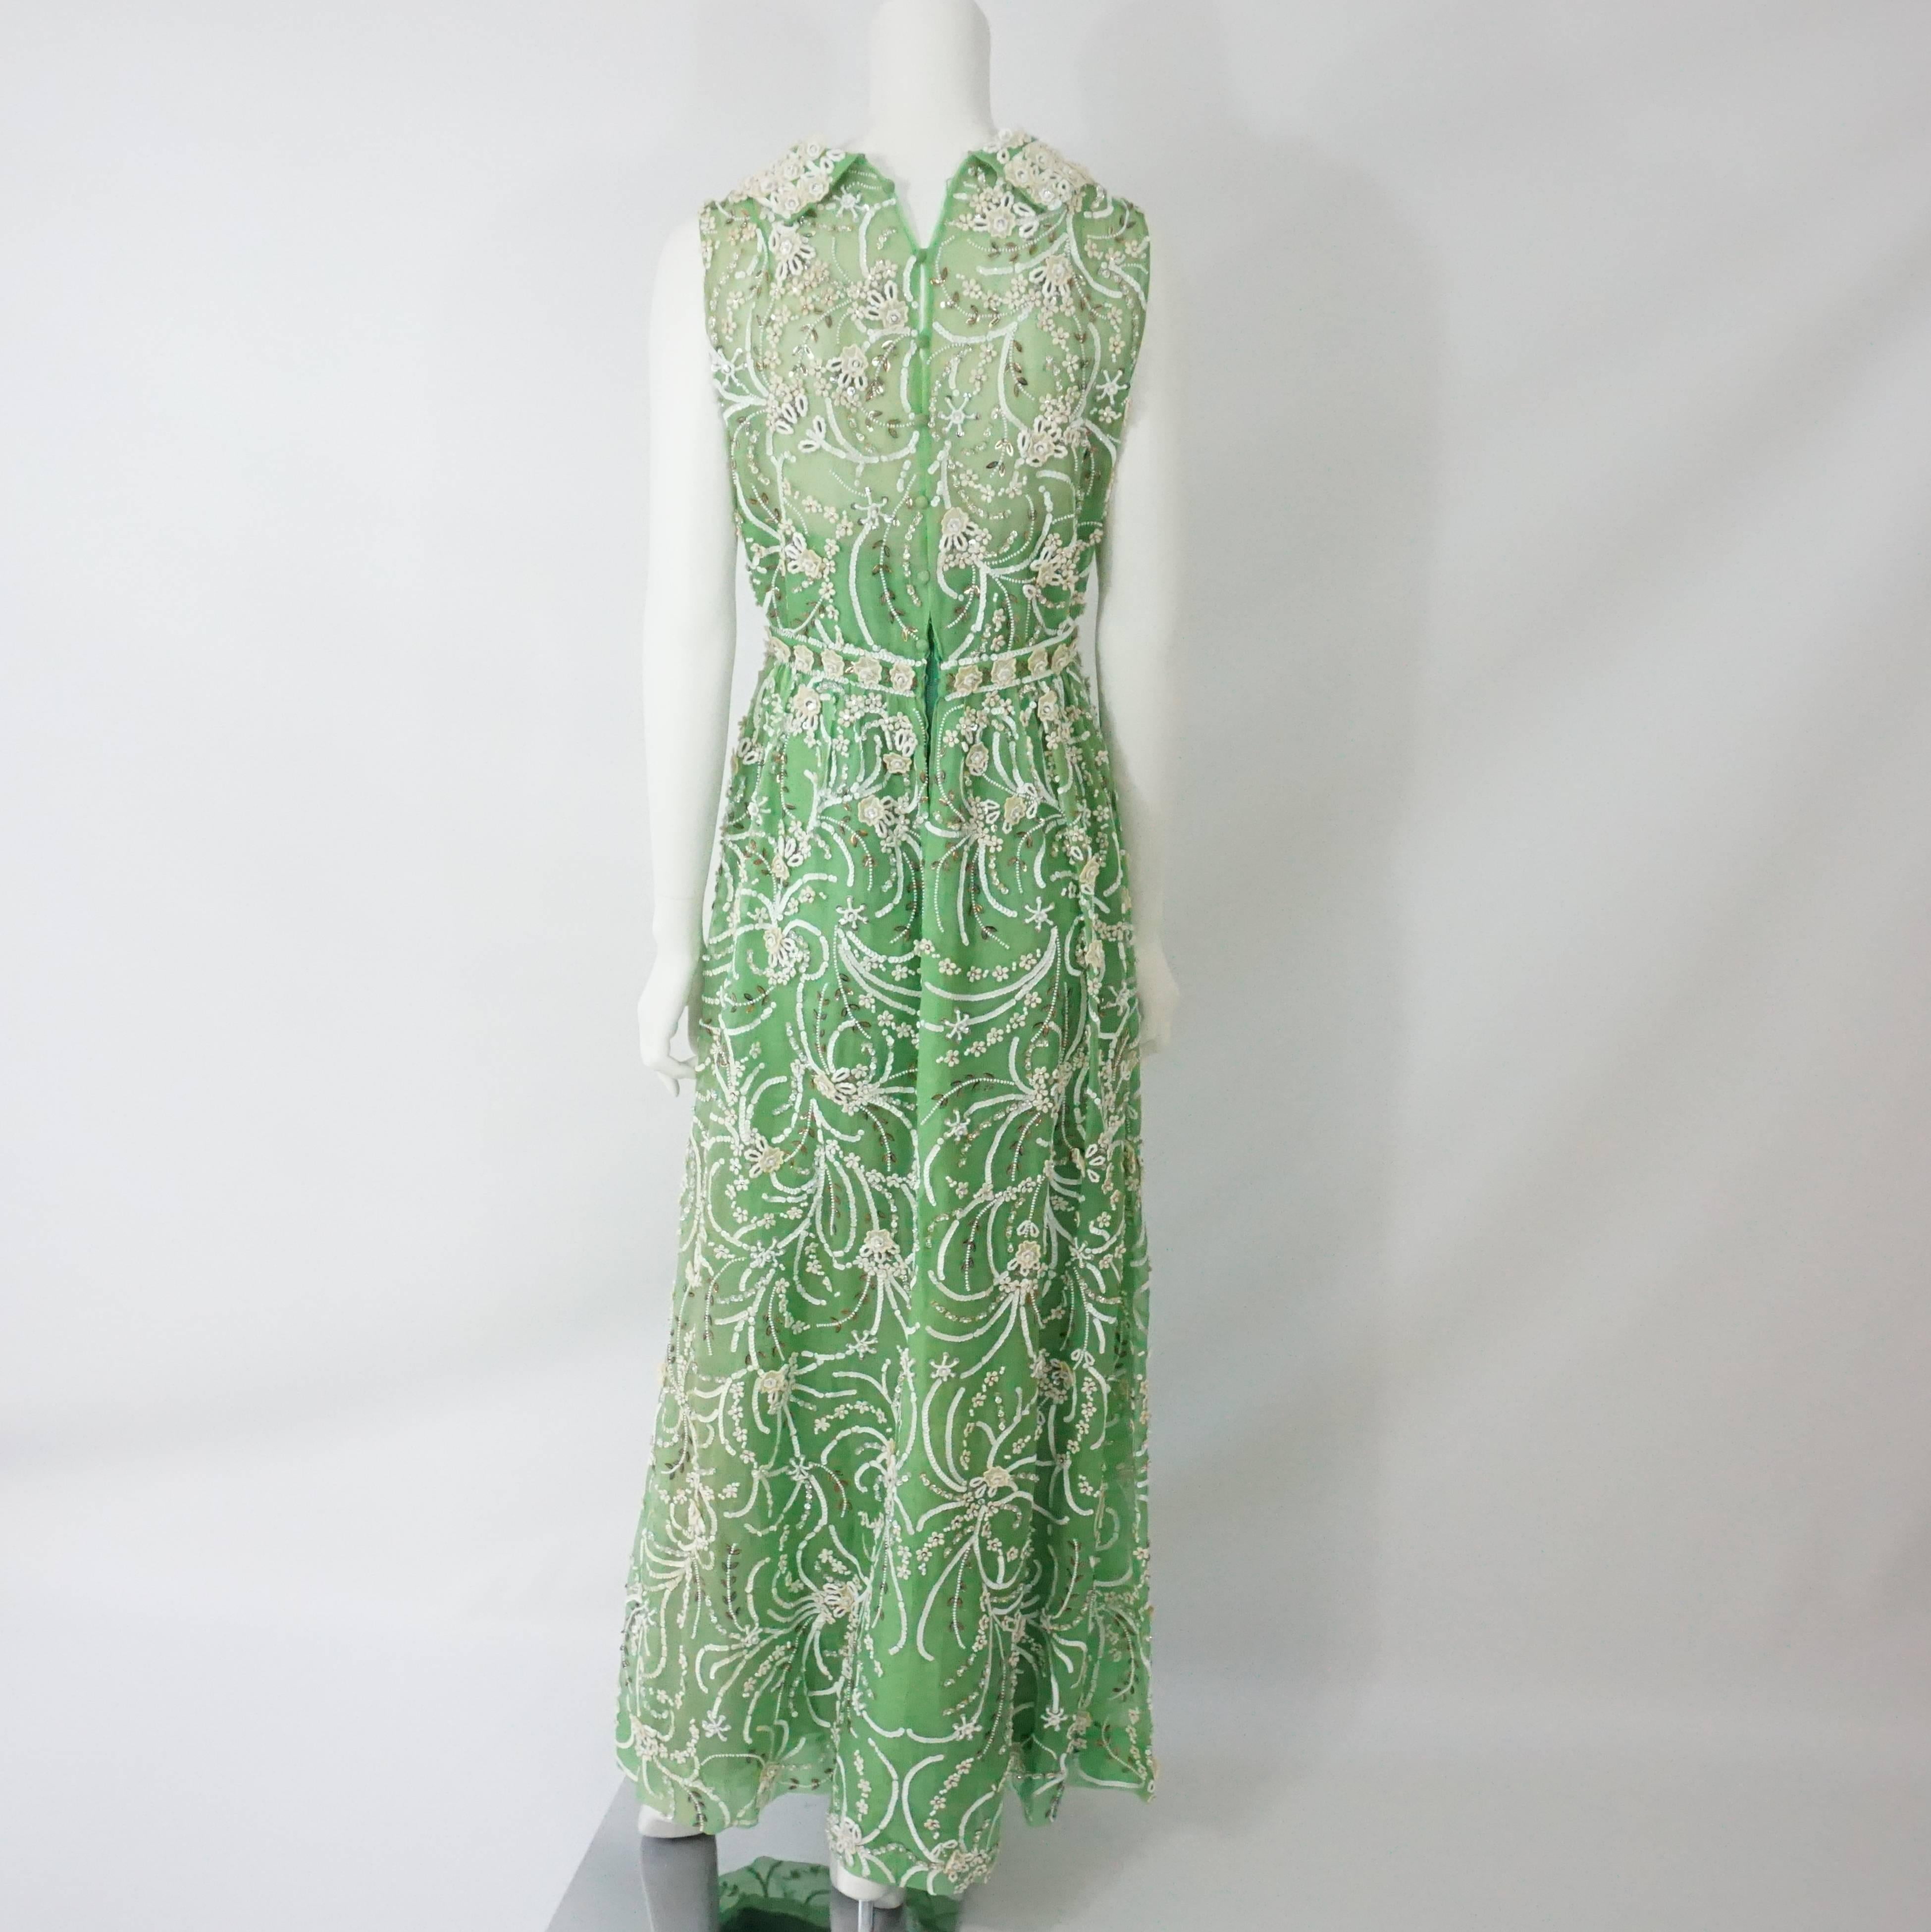 Gray Malcolm Starr Heavily Beaded Green Silk Organza Gown, Circa 1970s For Sale